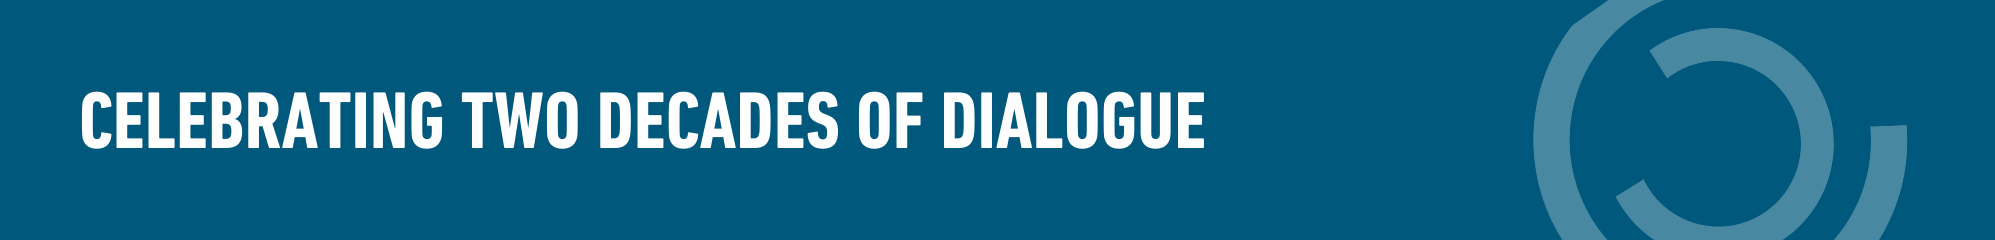 Blue background with circle motif and text "Celebrating two decades of dialogue"